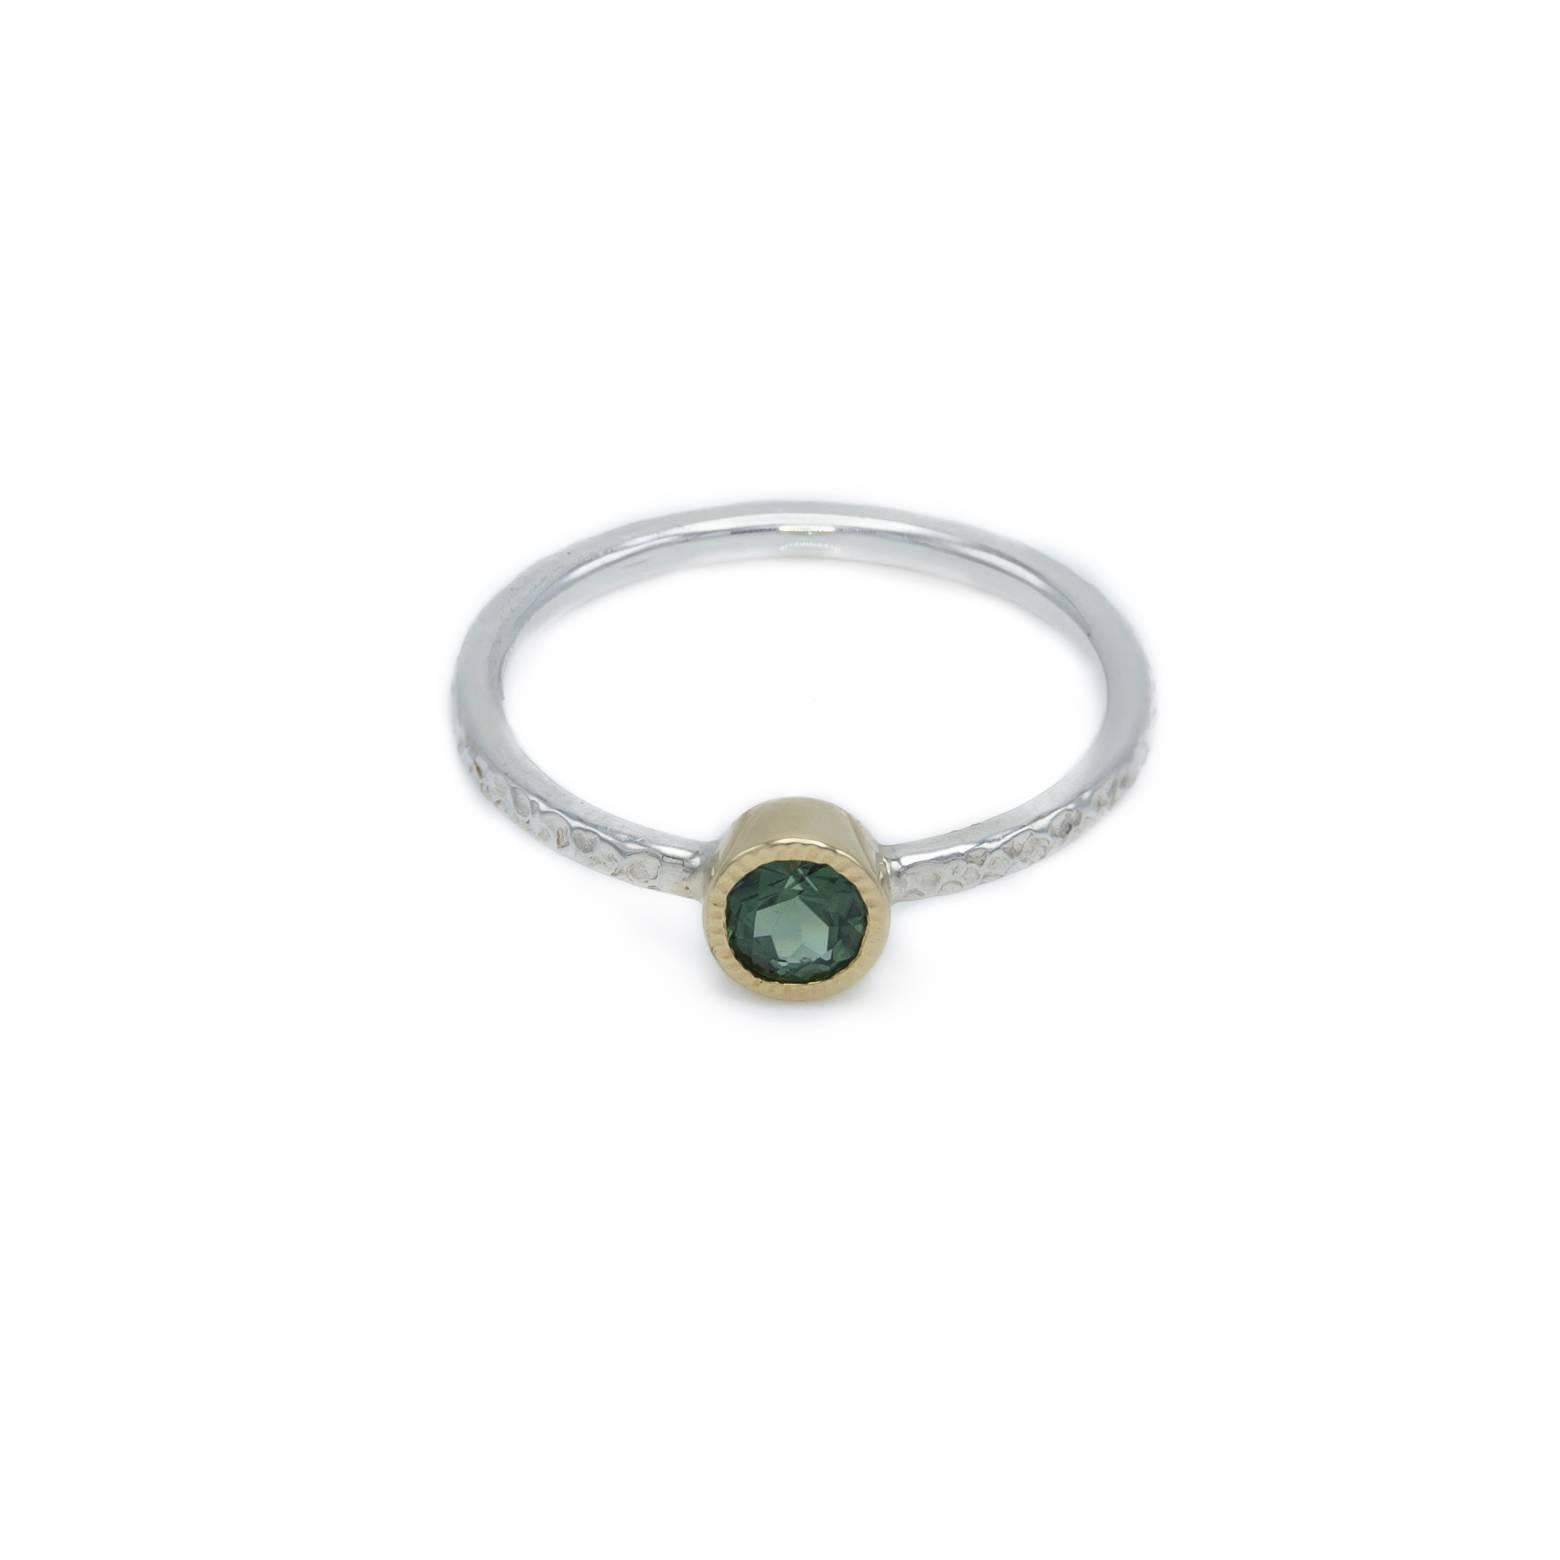 Beautiful sea green tourmaline set in a textured gold bezel with a bright white hammered sterling silver band. Artistic and interesting! A great stacking ring yet substantial enough to wear alone. Size 6.25